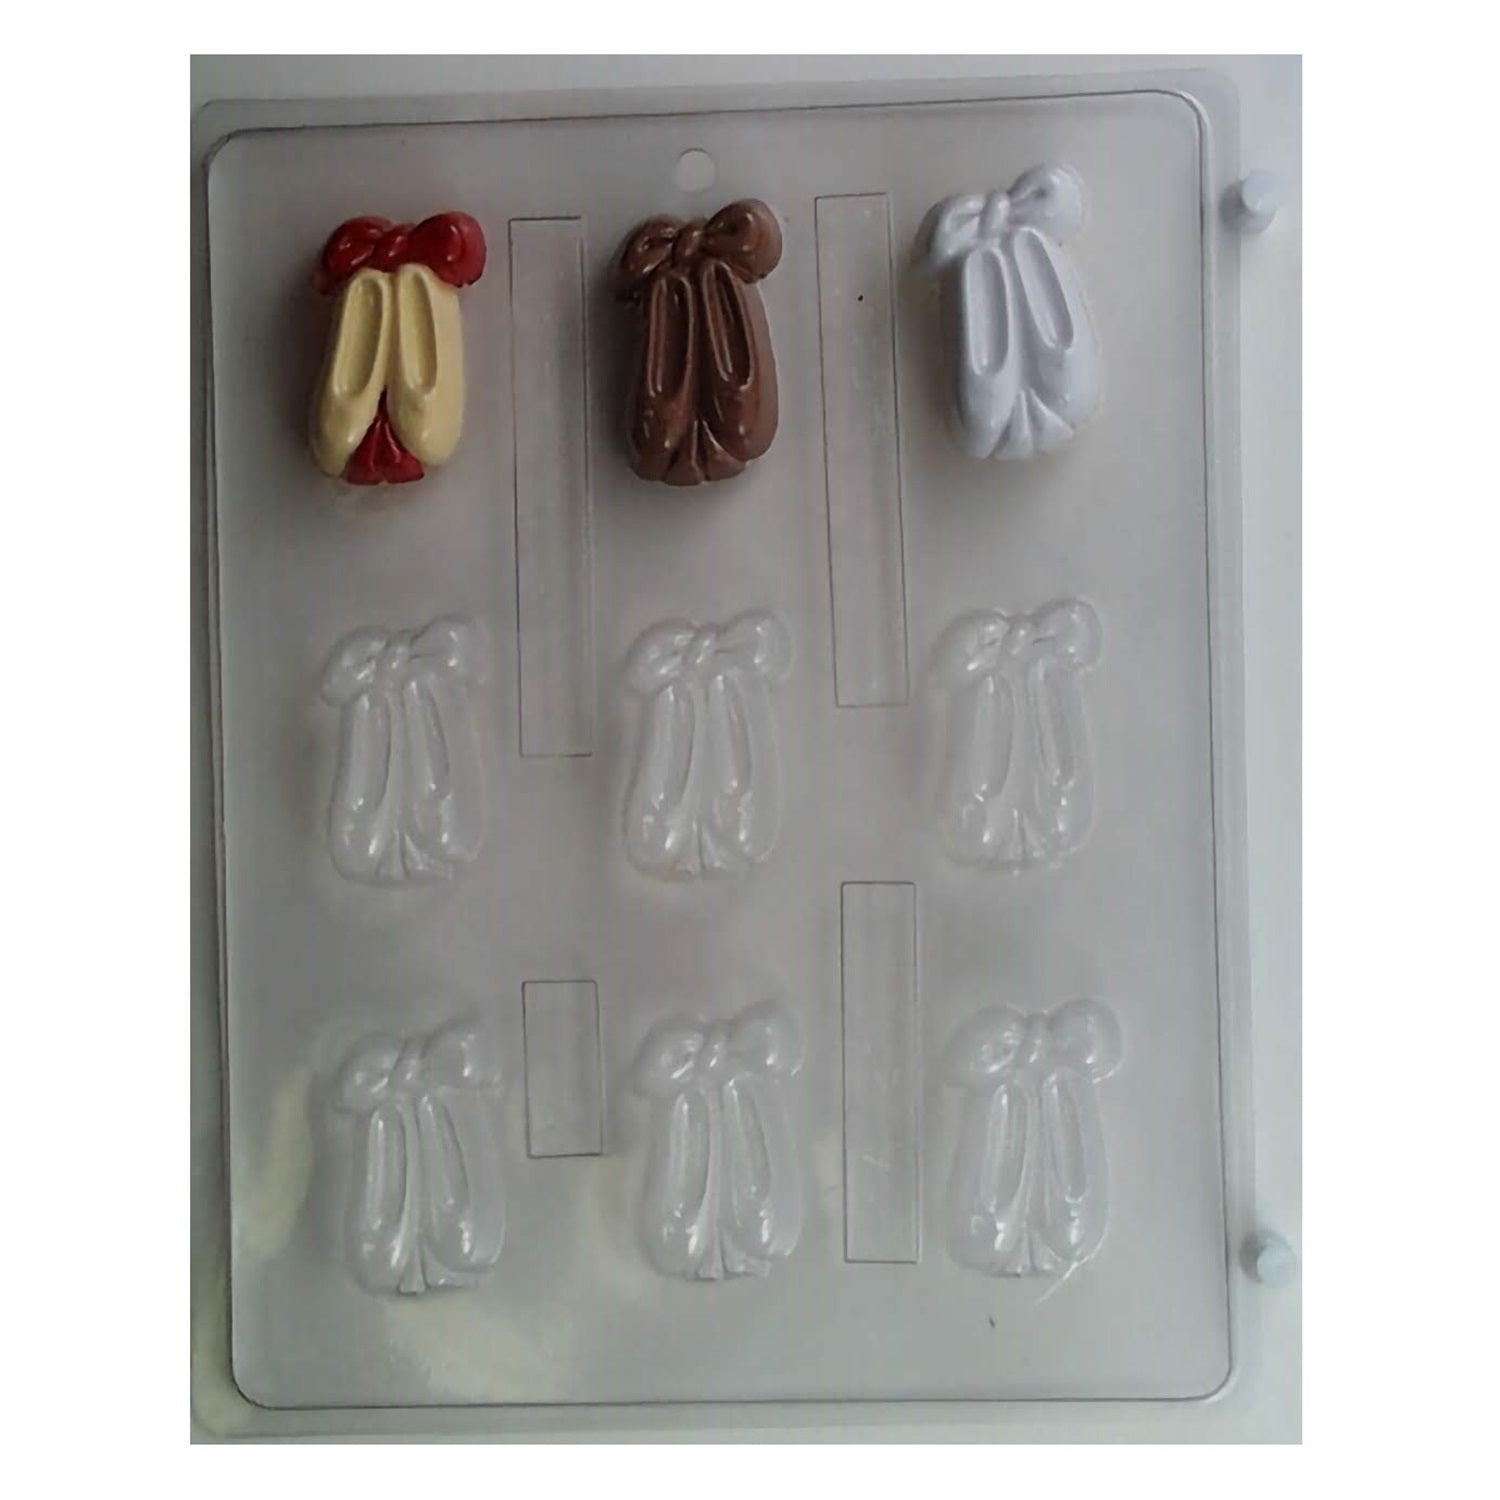 A delicate chocolate mold featuring several cavities in the shape of ballet slippers with bows. The mold captures the graceful curves and details of ballet footwear.